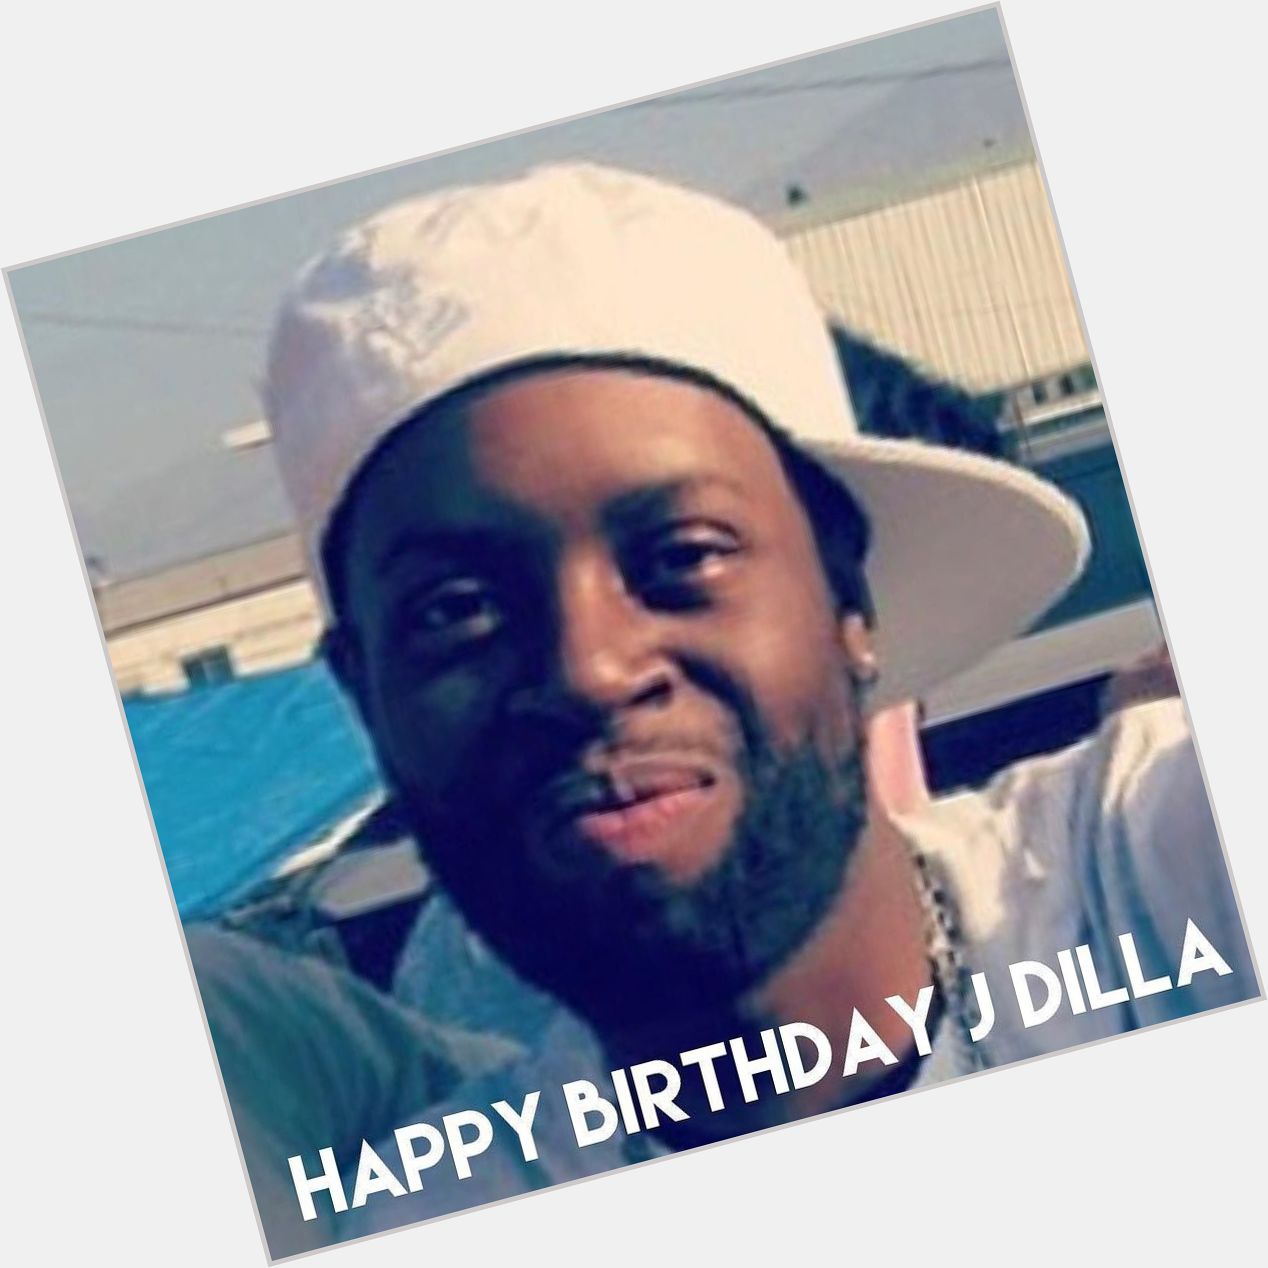 Happy Birthday J Dilla! Black History Fact:
Today He would have been 45 years old.
He was 